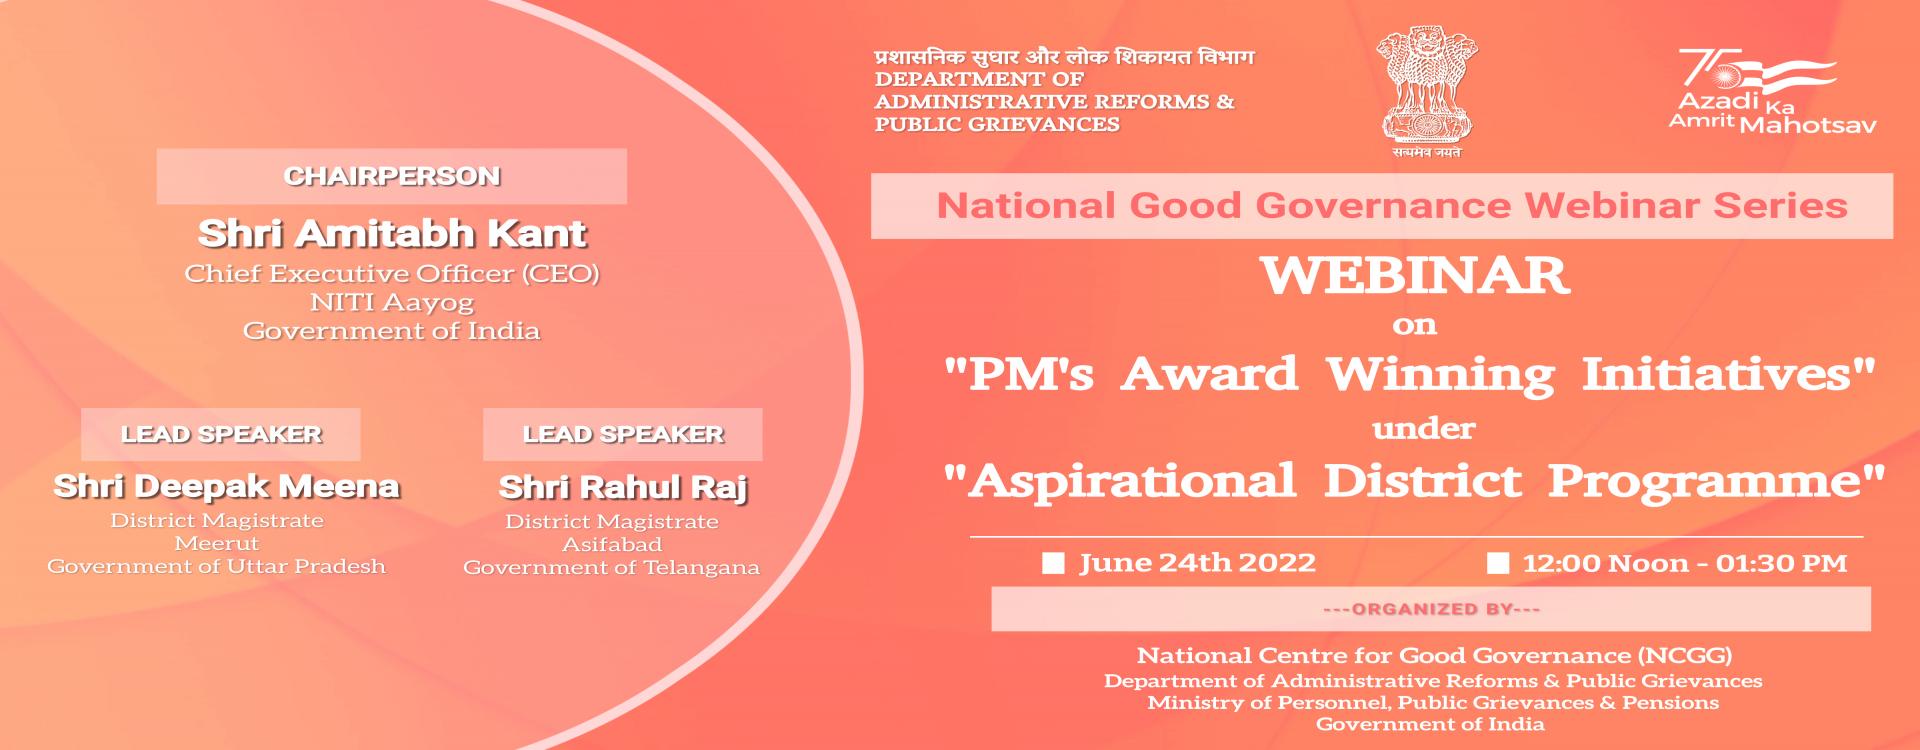 National Good Governance Webinar Series on &quot;PM&#039;s Award Winning Initiatives under Aspirational District Programme&quot; on 24th June 2022 from 1200 Hrs - 1330 Hrs